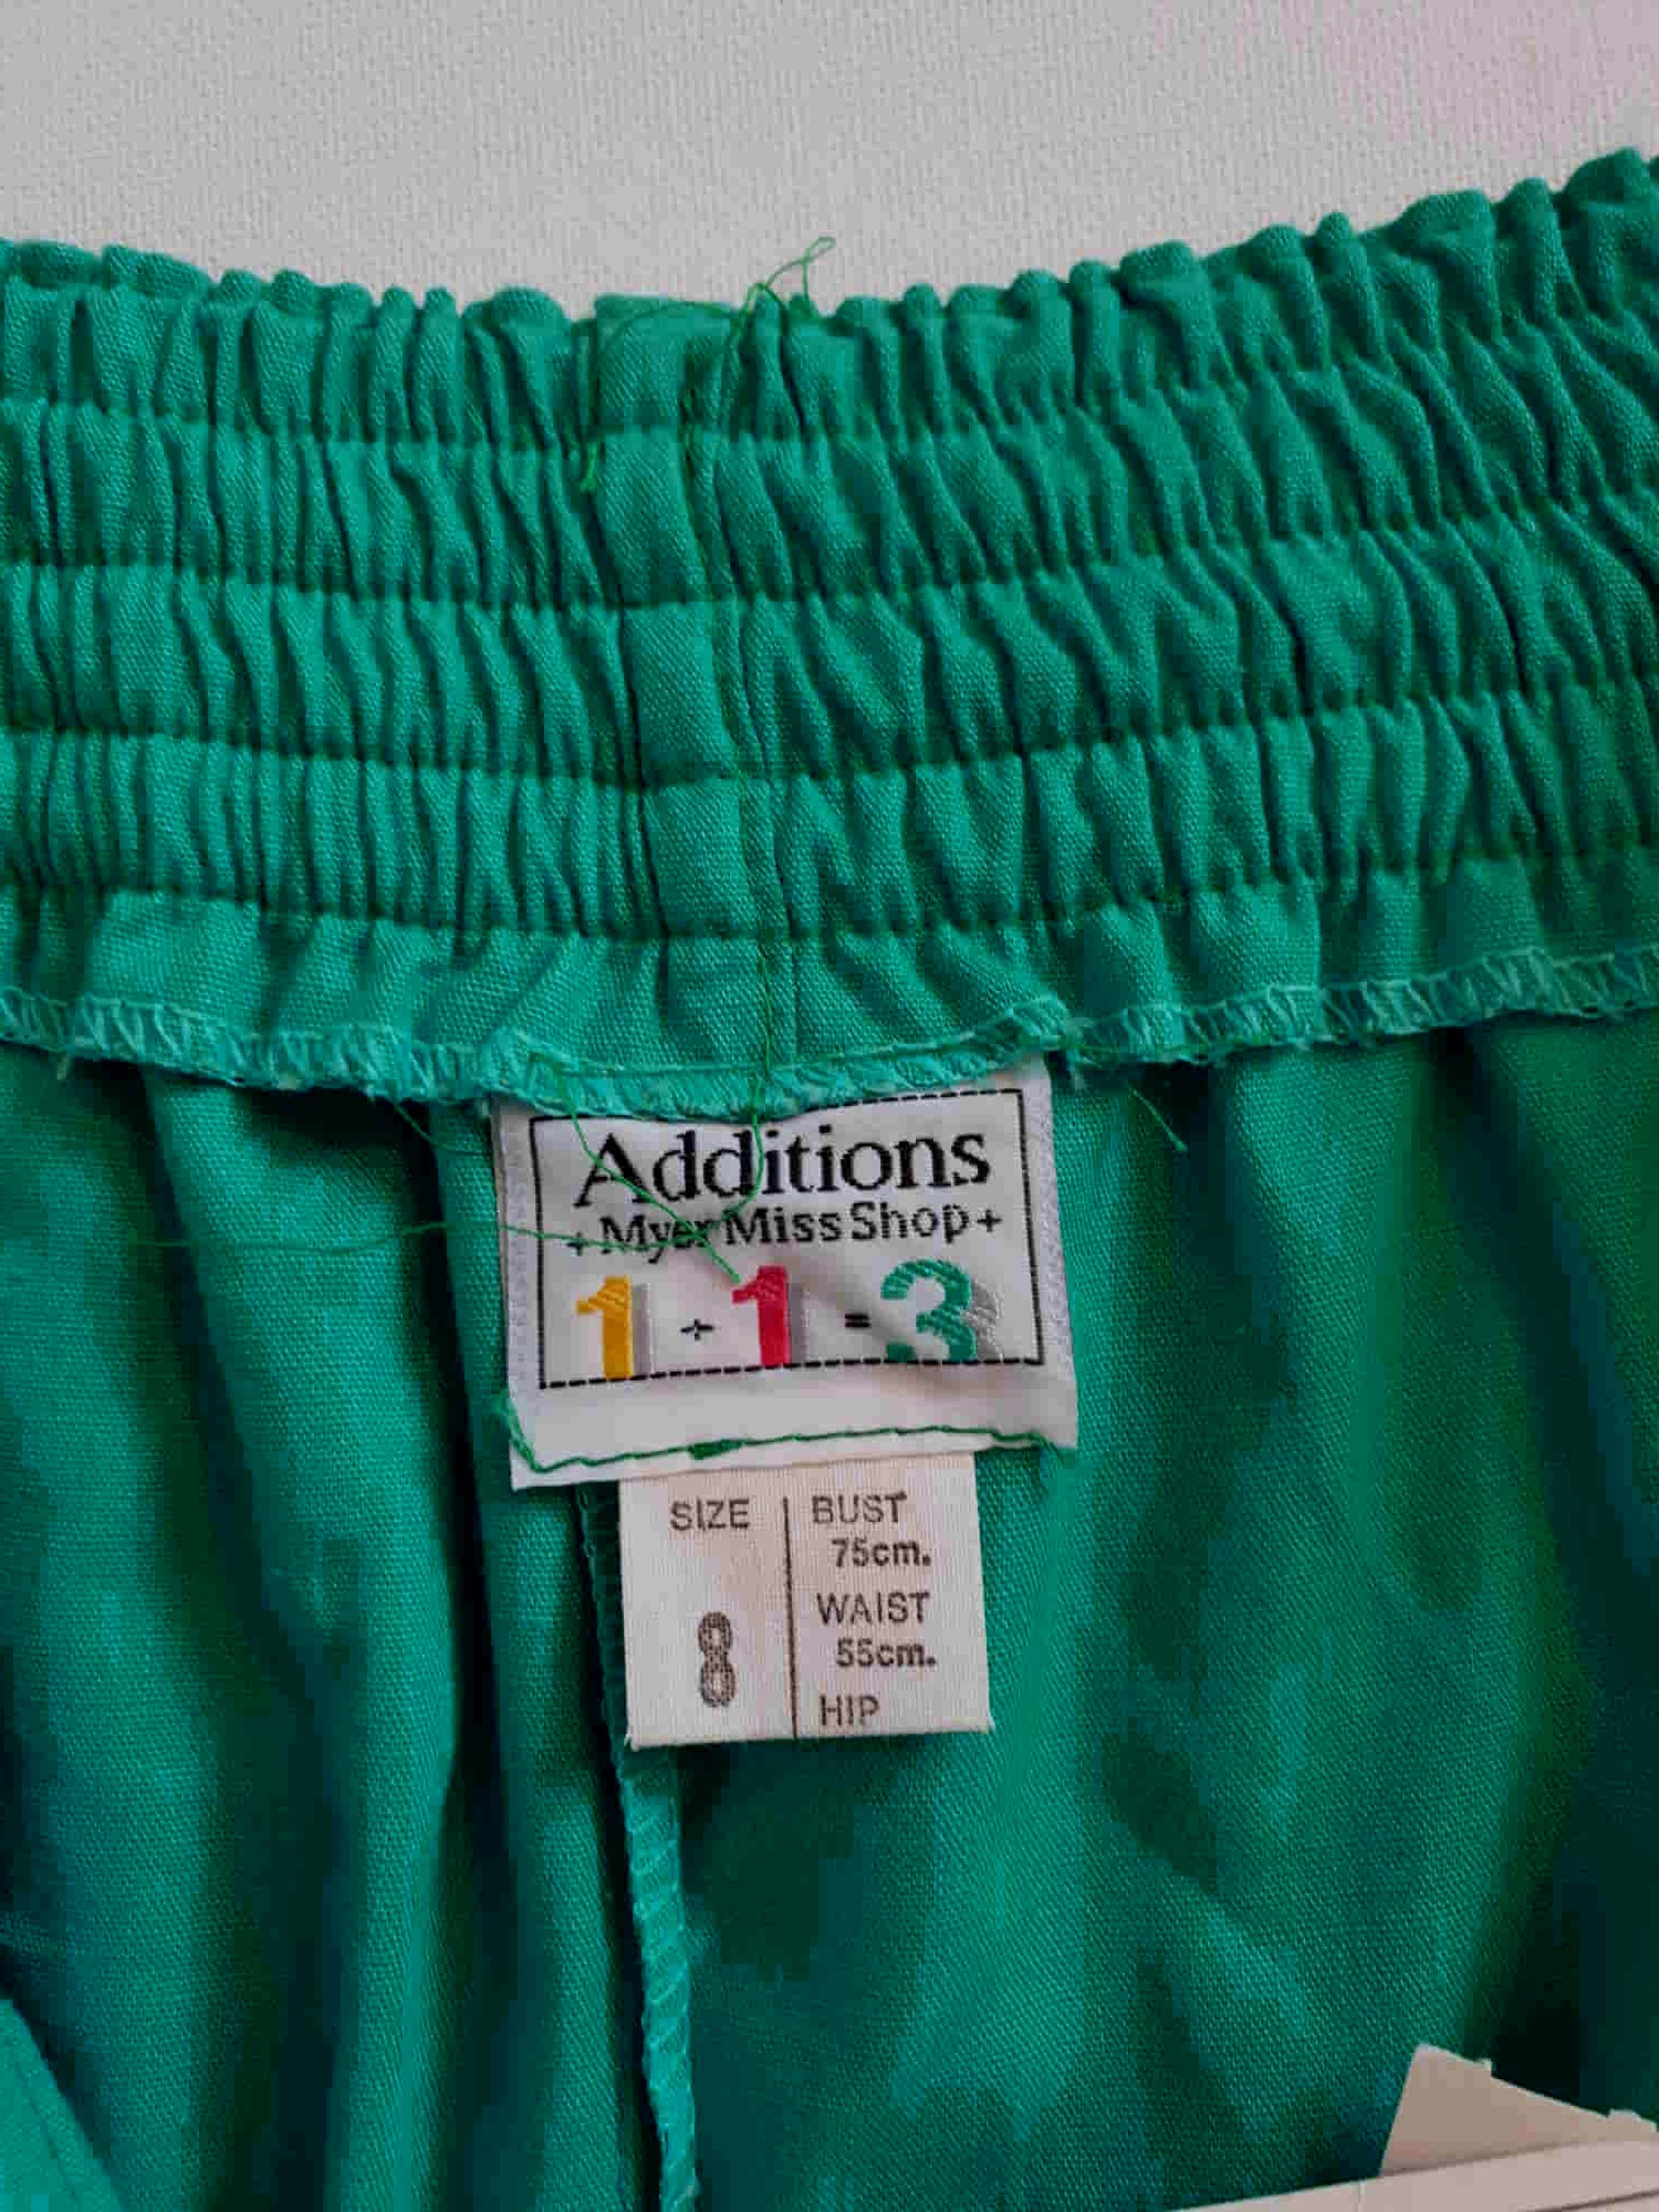 vintage 1980s baggy pants with tapered legs in jade green. New old stock.